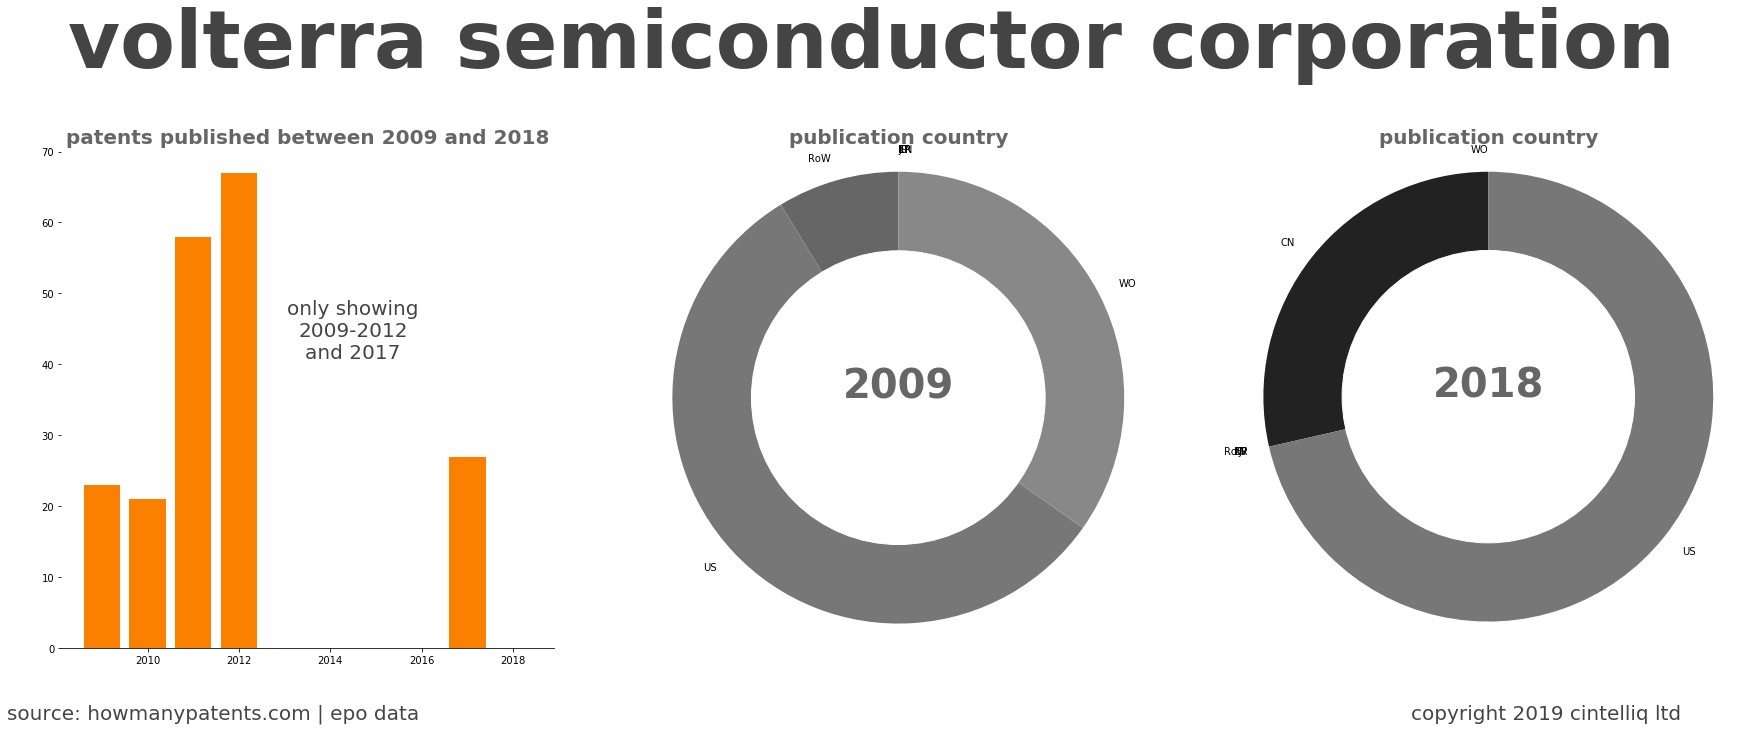 summary of patents for Volterra Semiconductor Corporation